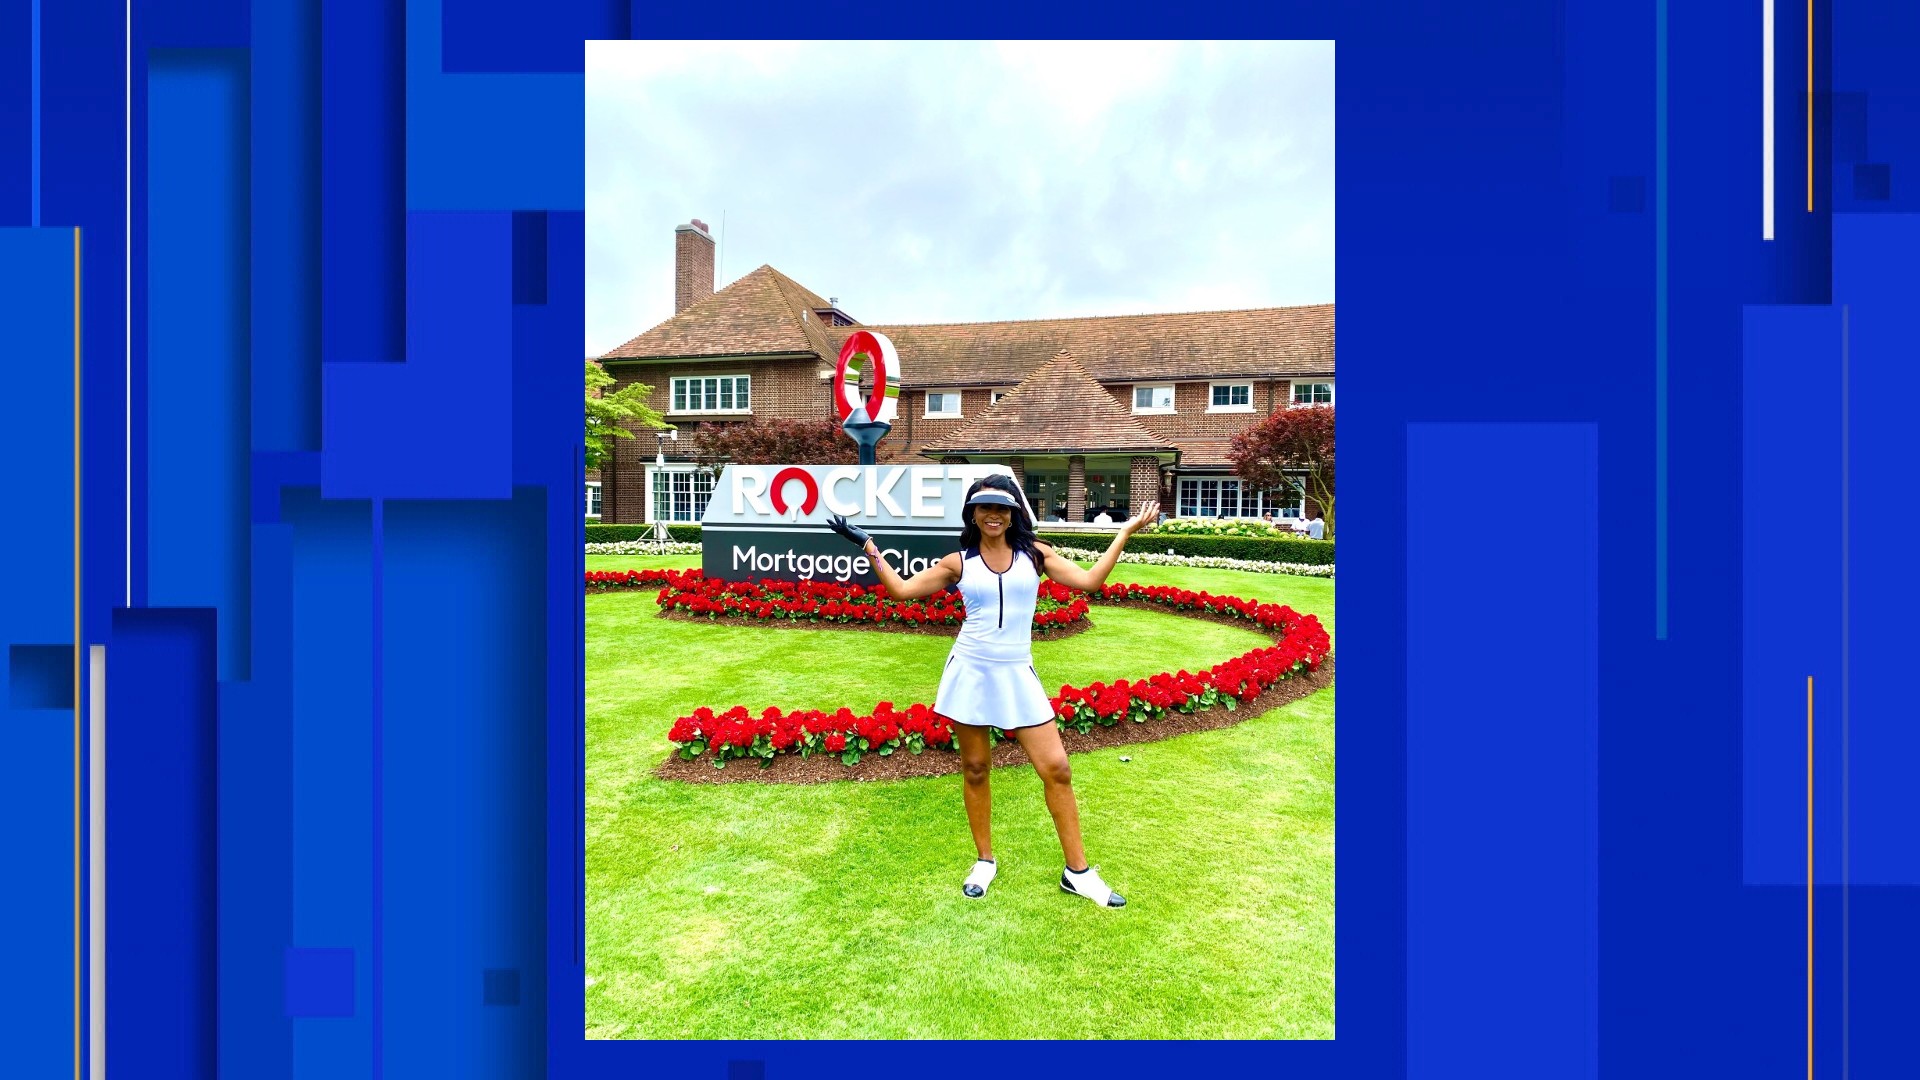 Rhonda Walker describes her experience at Rocket Mortgage Classic Pro-Am in Detroit